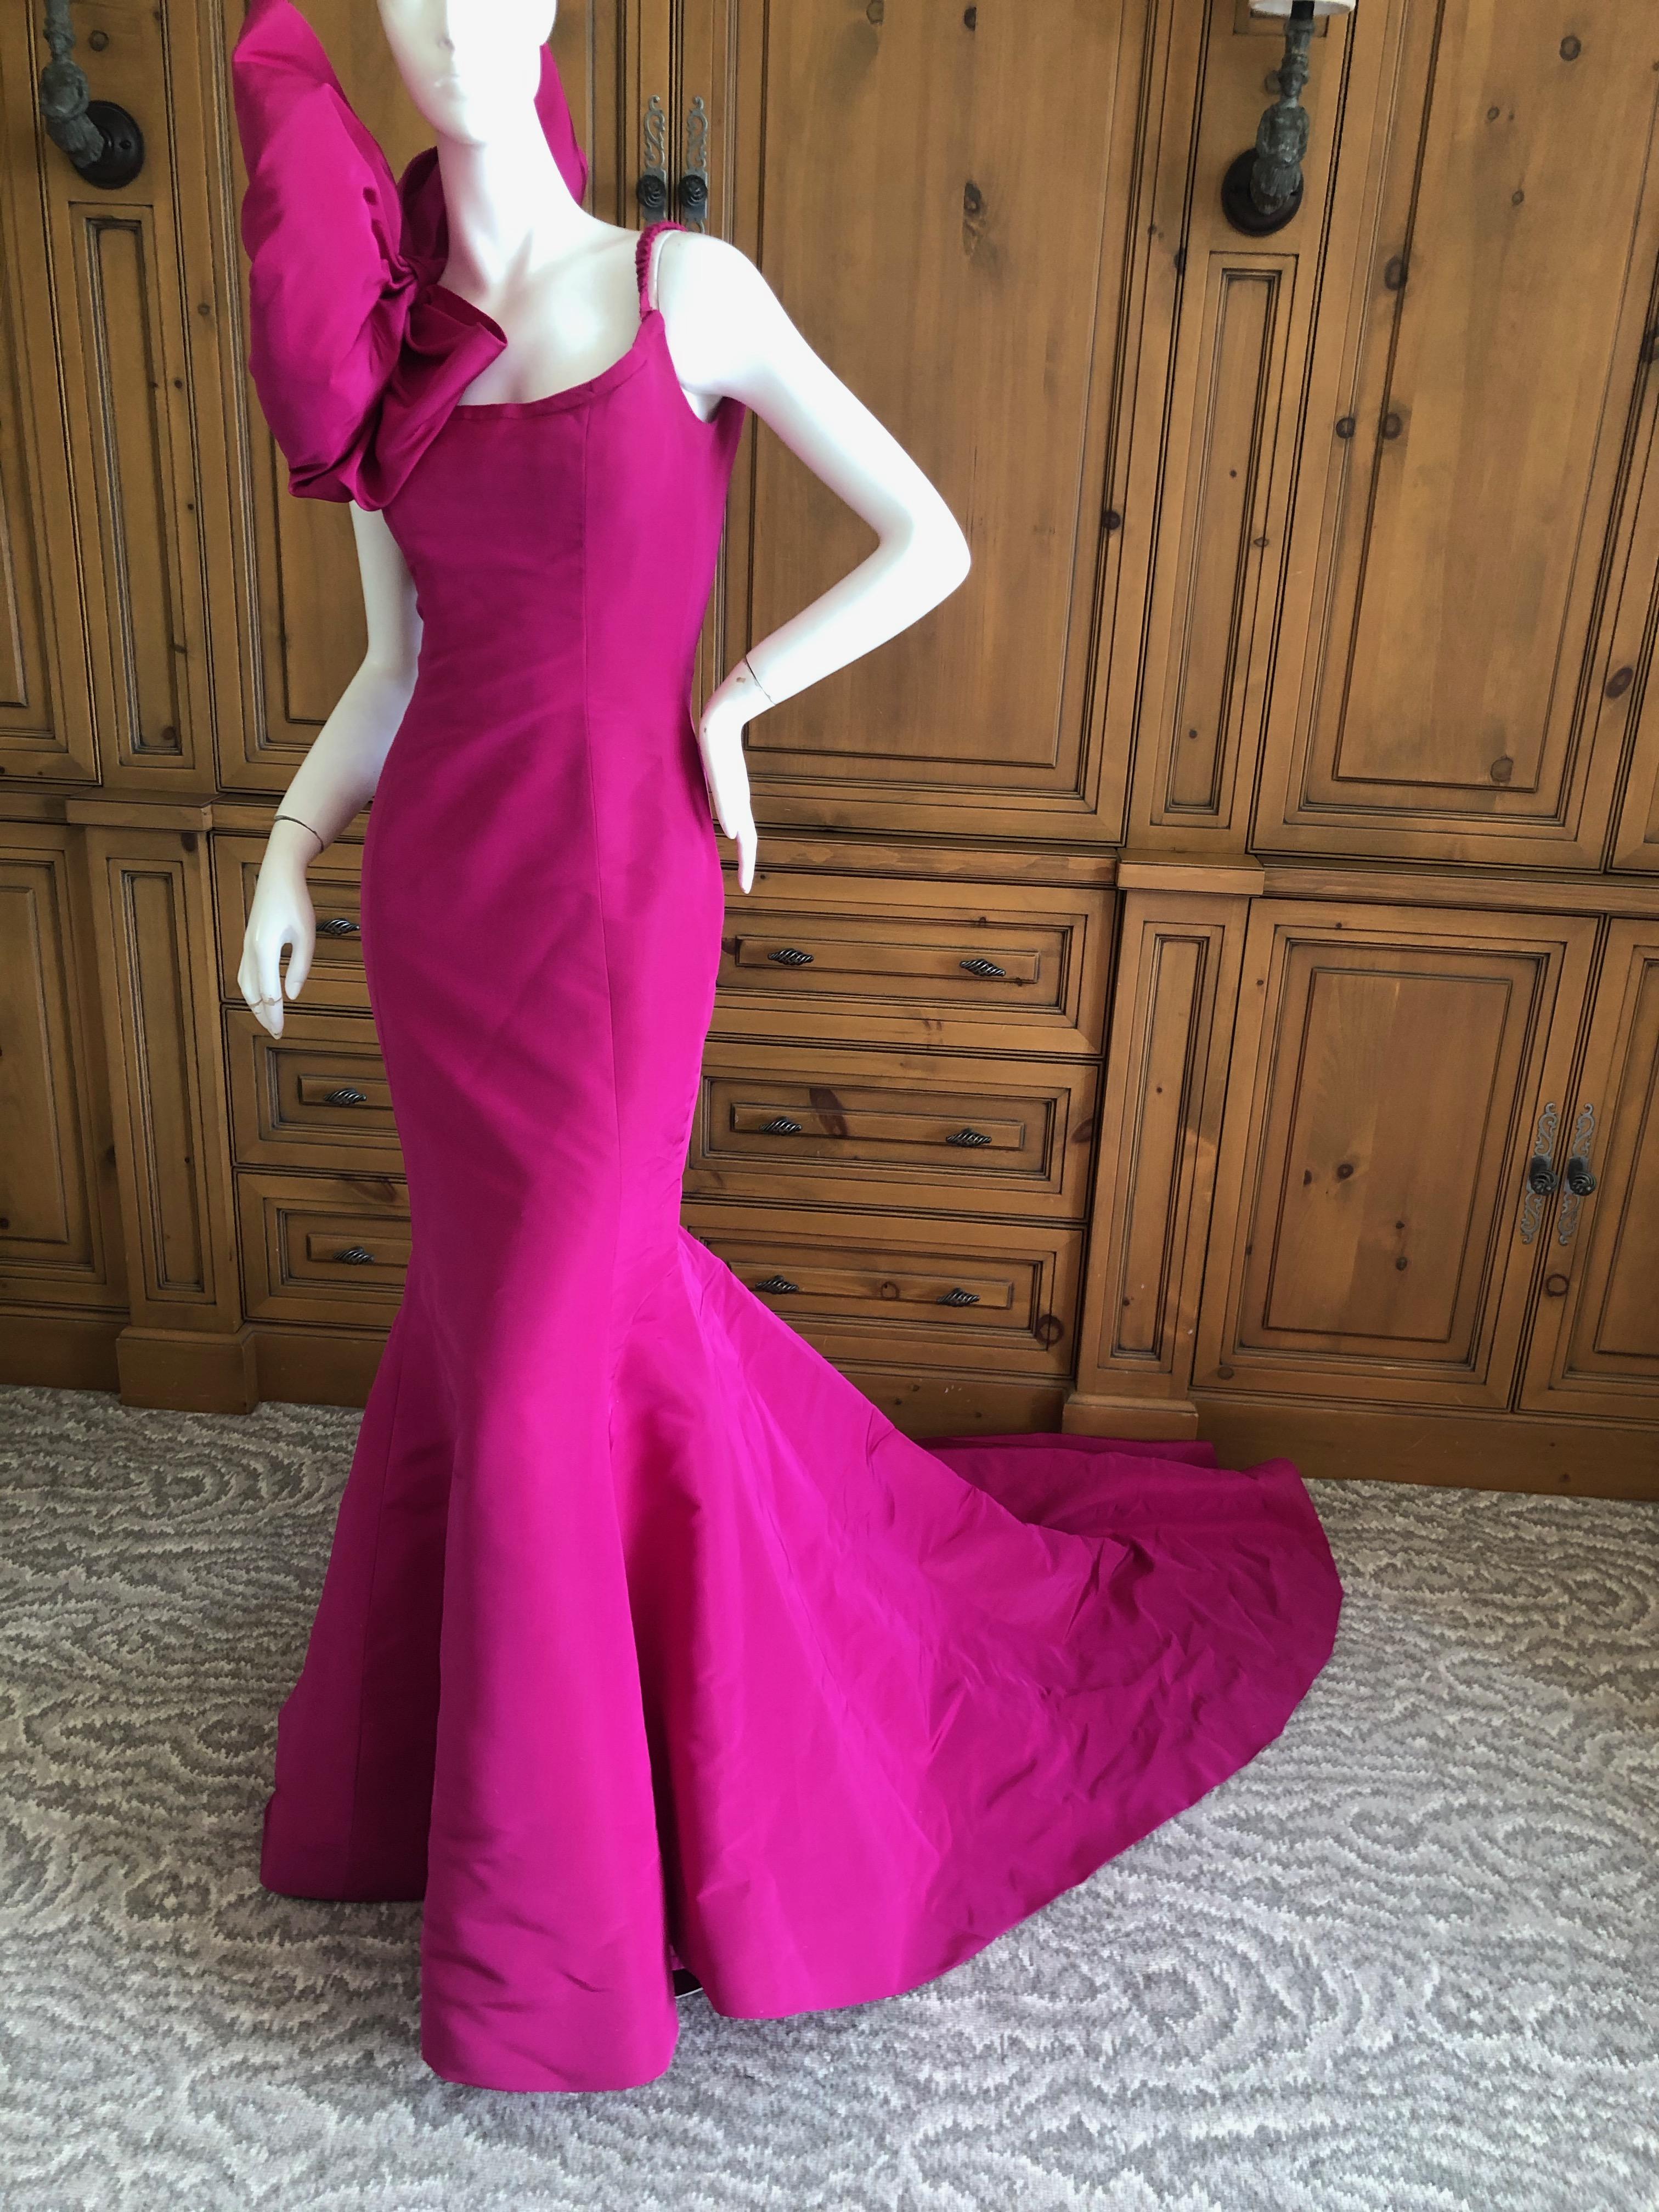 Oscar de la Renta Hot Pink Vintage Mermaid Dress w Inner Corset  and Long Train.
There is a huge bow on one shoulder, simply sublime.
 Stunning. Please use the zoom feature to see all the remarkable details.
Size 2, there is no size tag.  This might